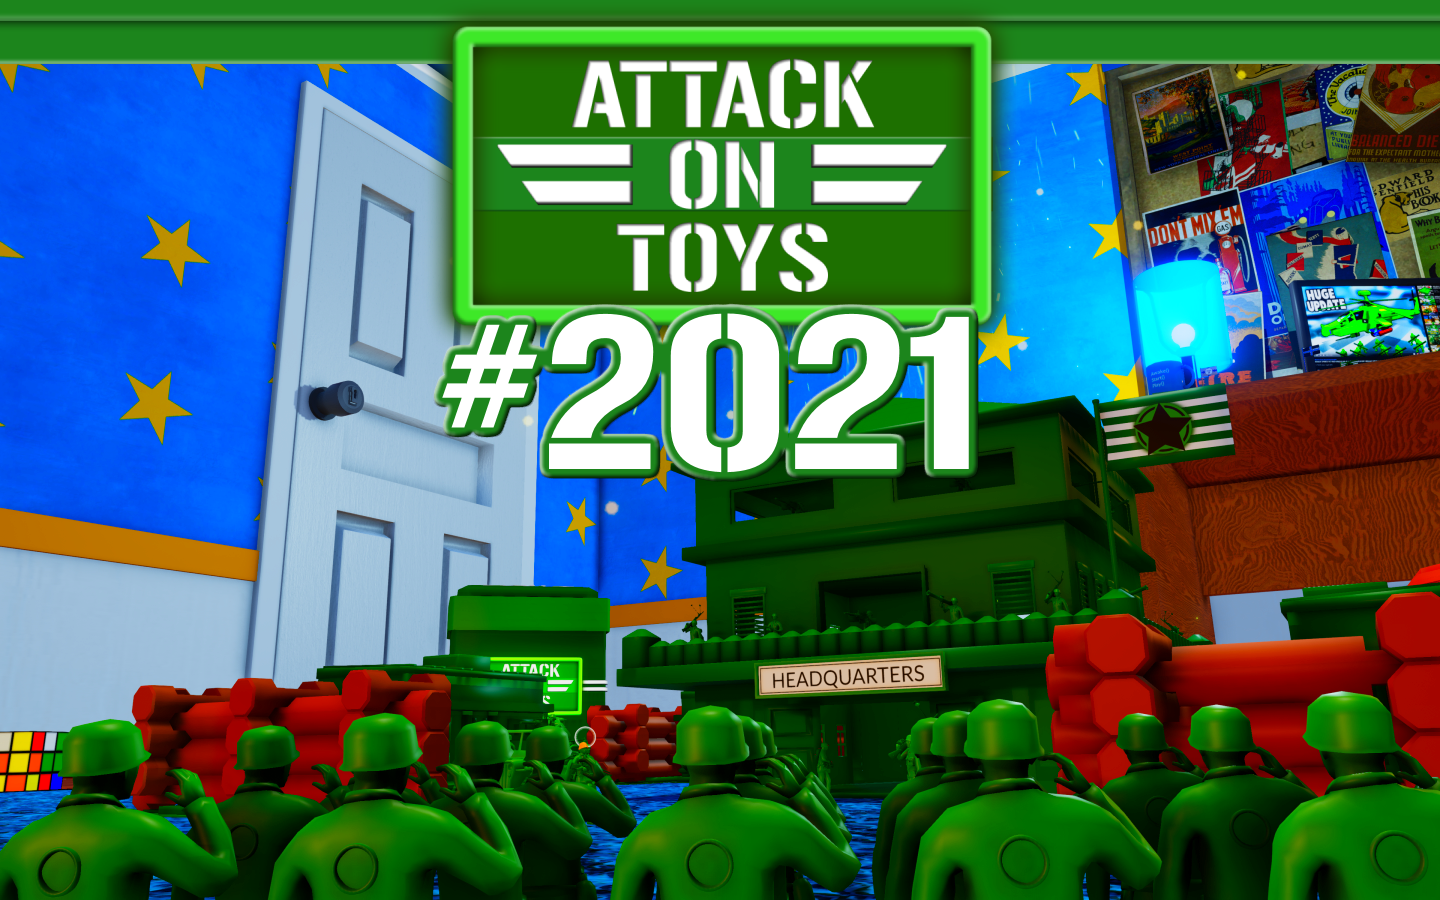 Attack on Toys #2021